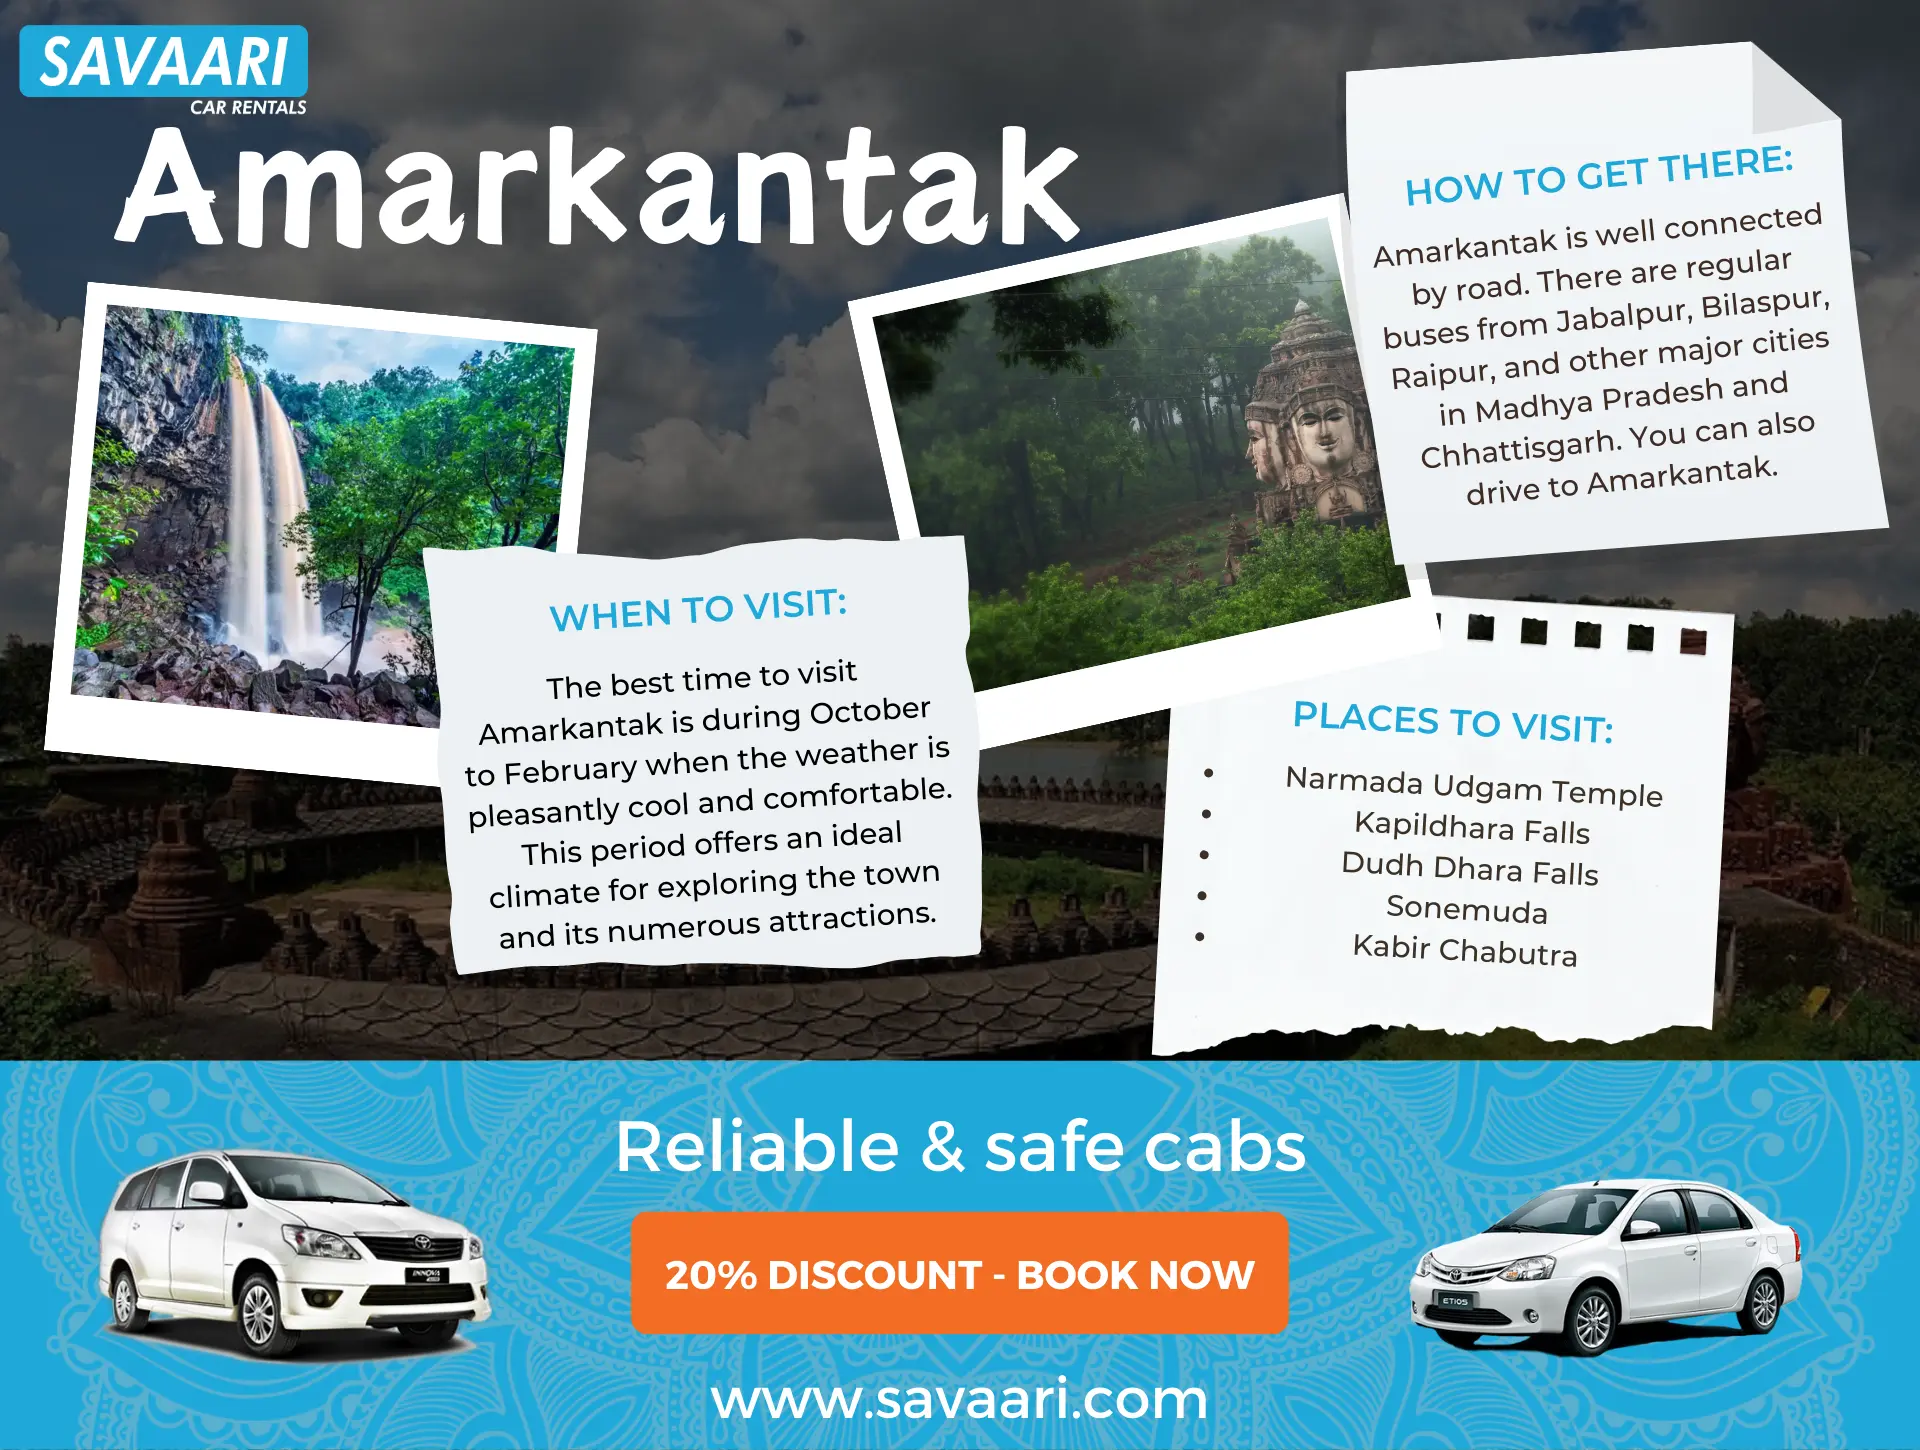 Things to do in Amarkantak